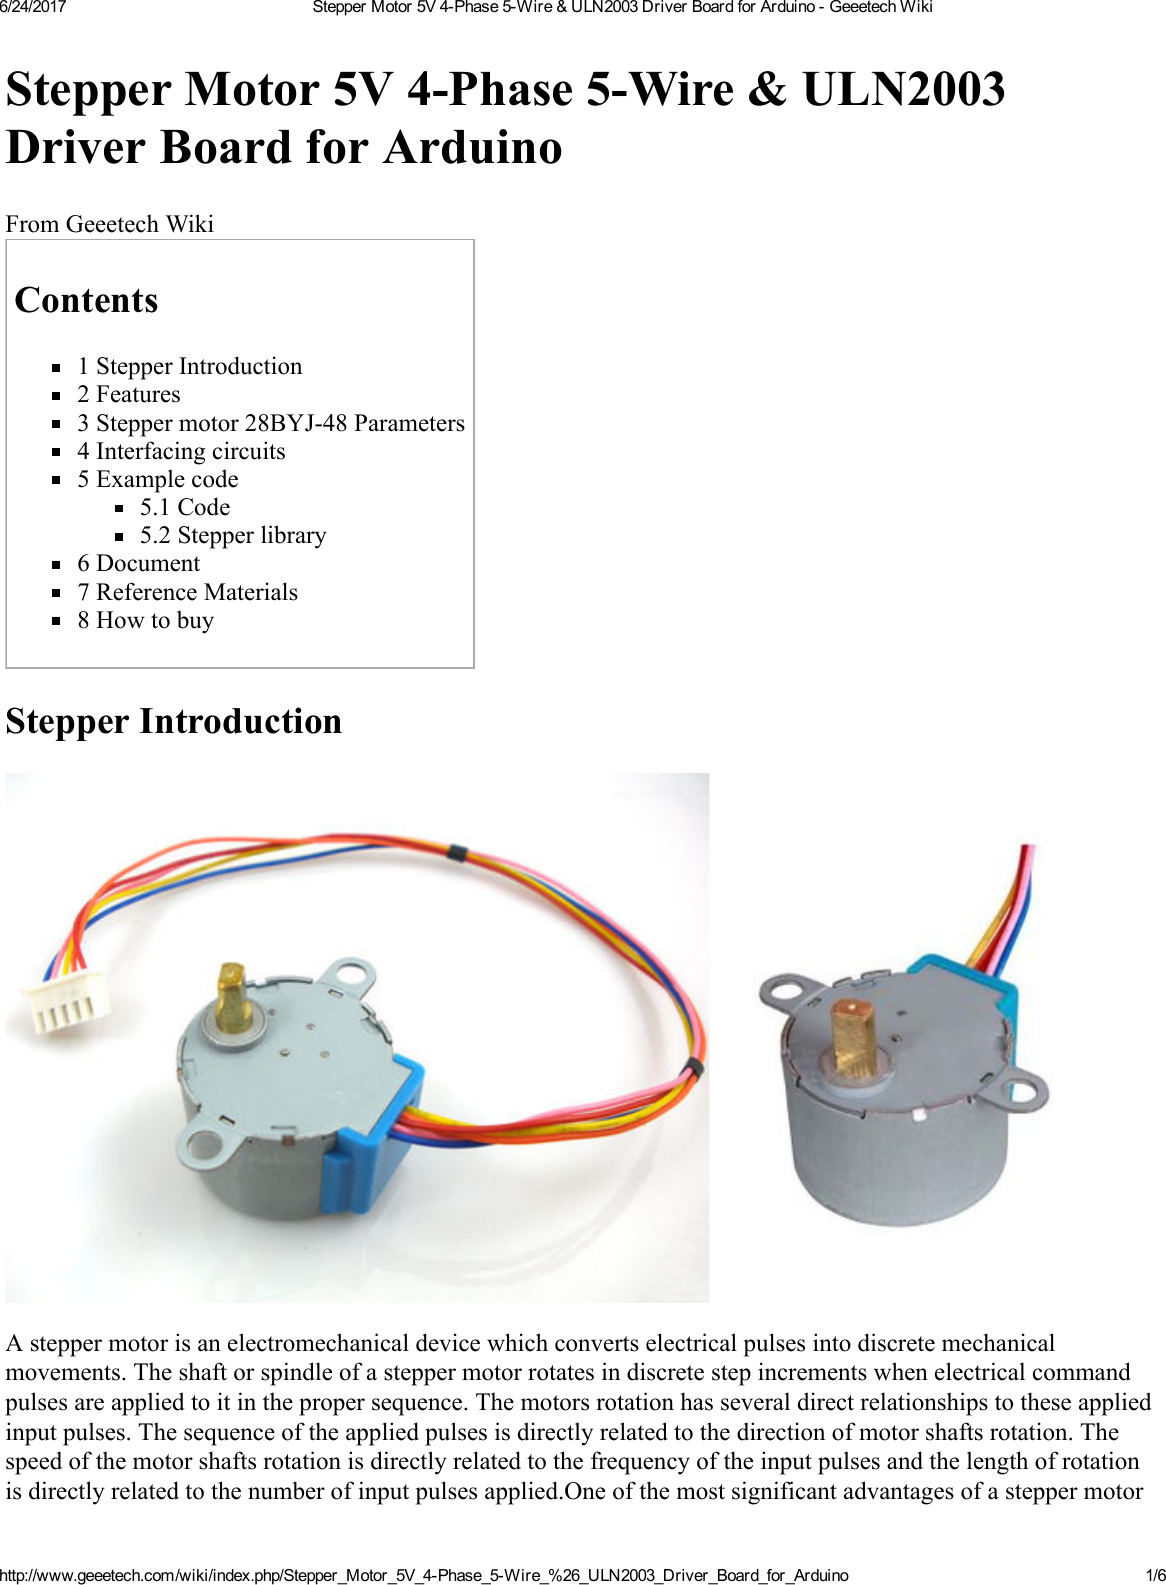 Page 1 of 6 - Stepper Motor 5V 4-Phase 5-Wire & ULN2003 Driver Board For Arduino - Geeetech Wiki